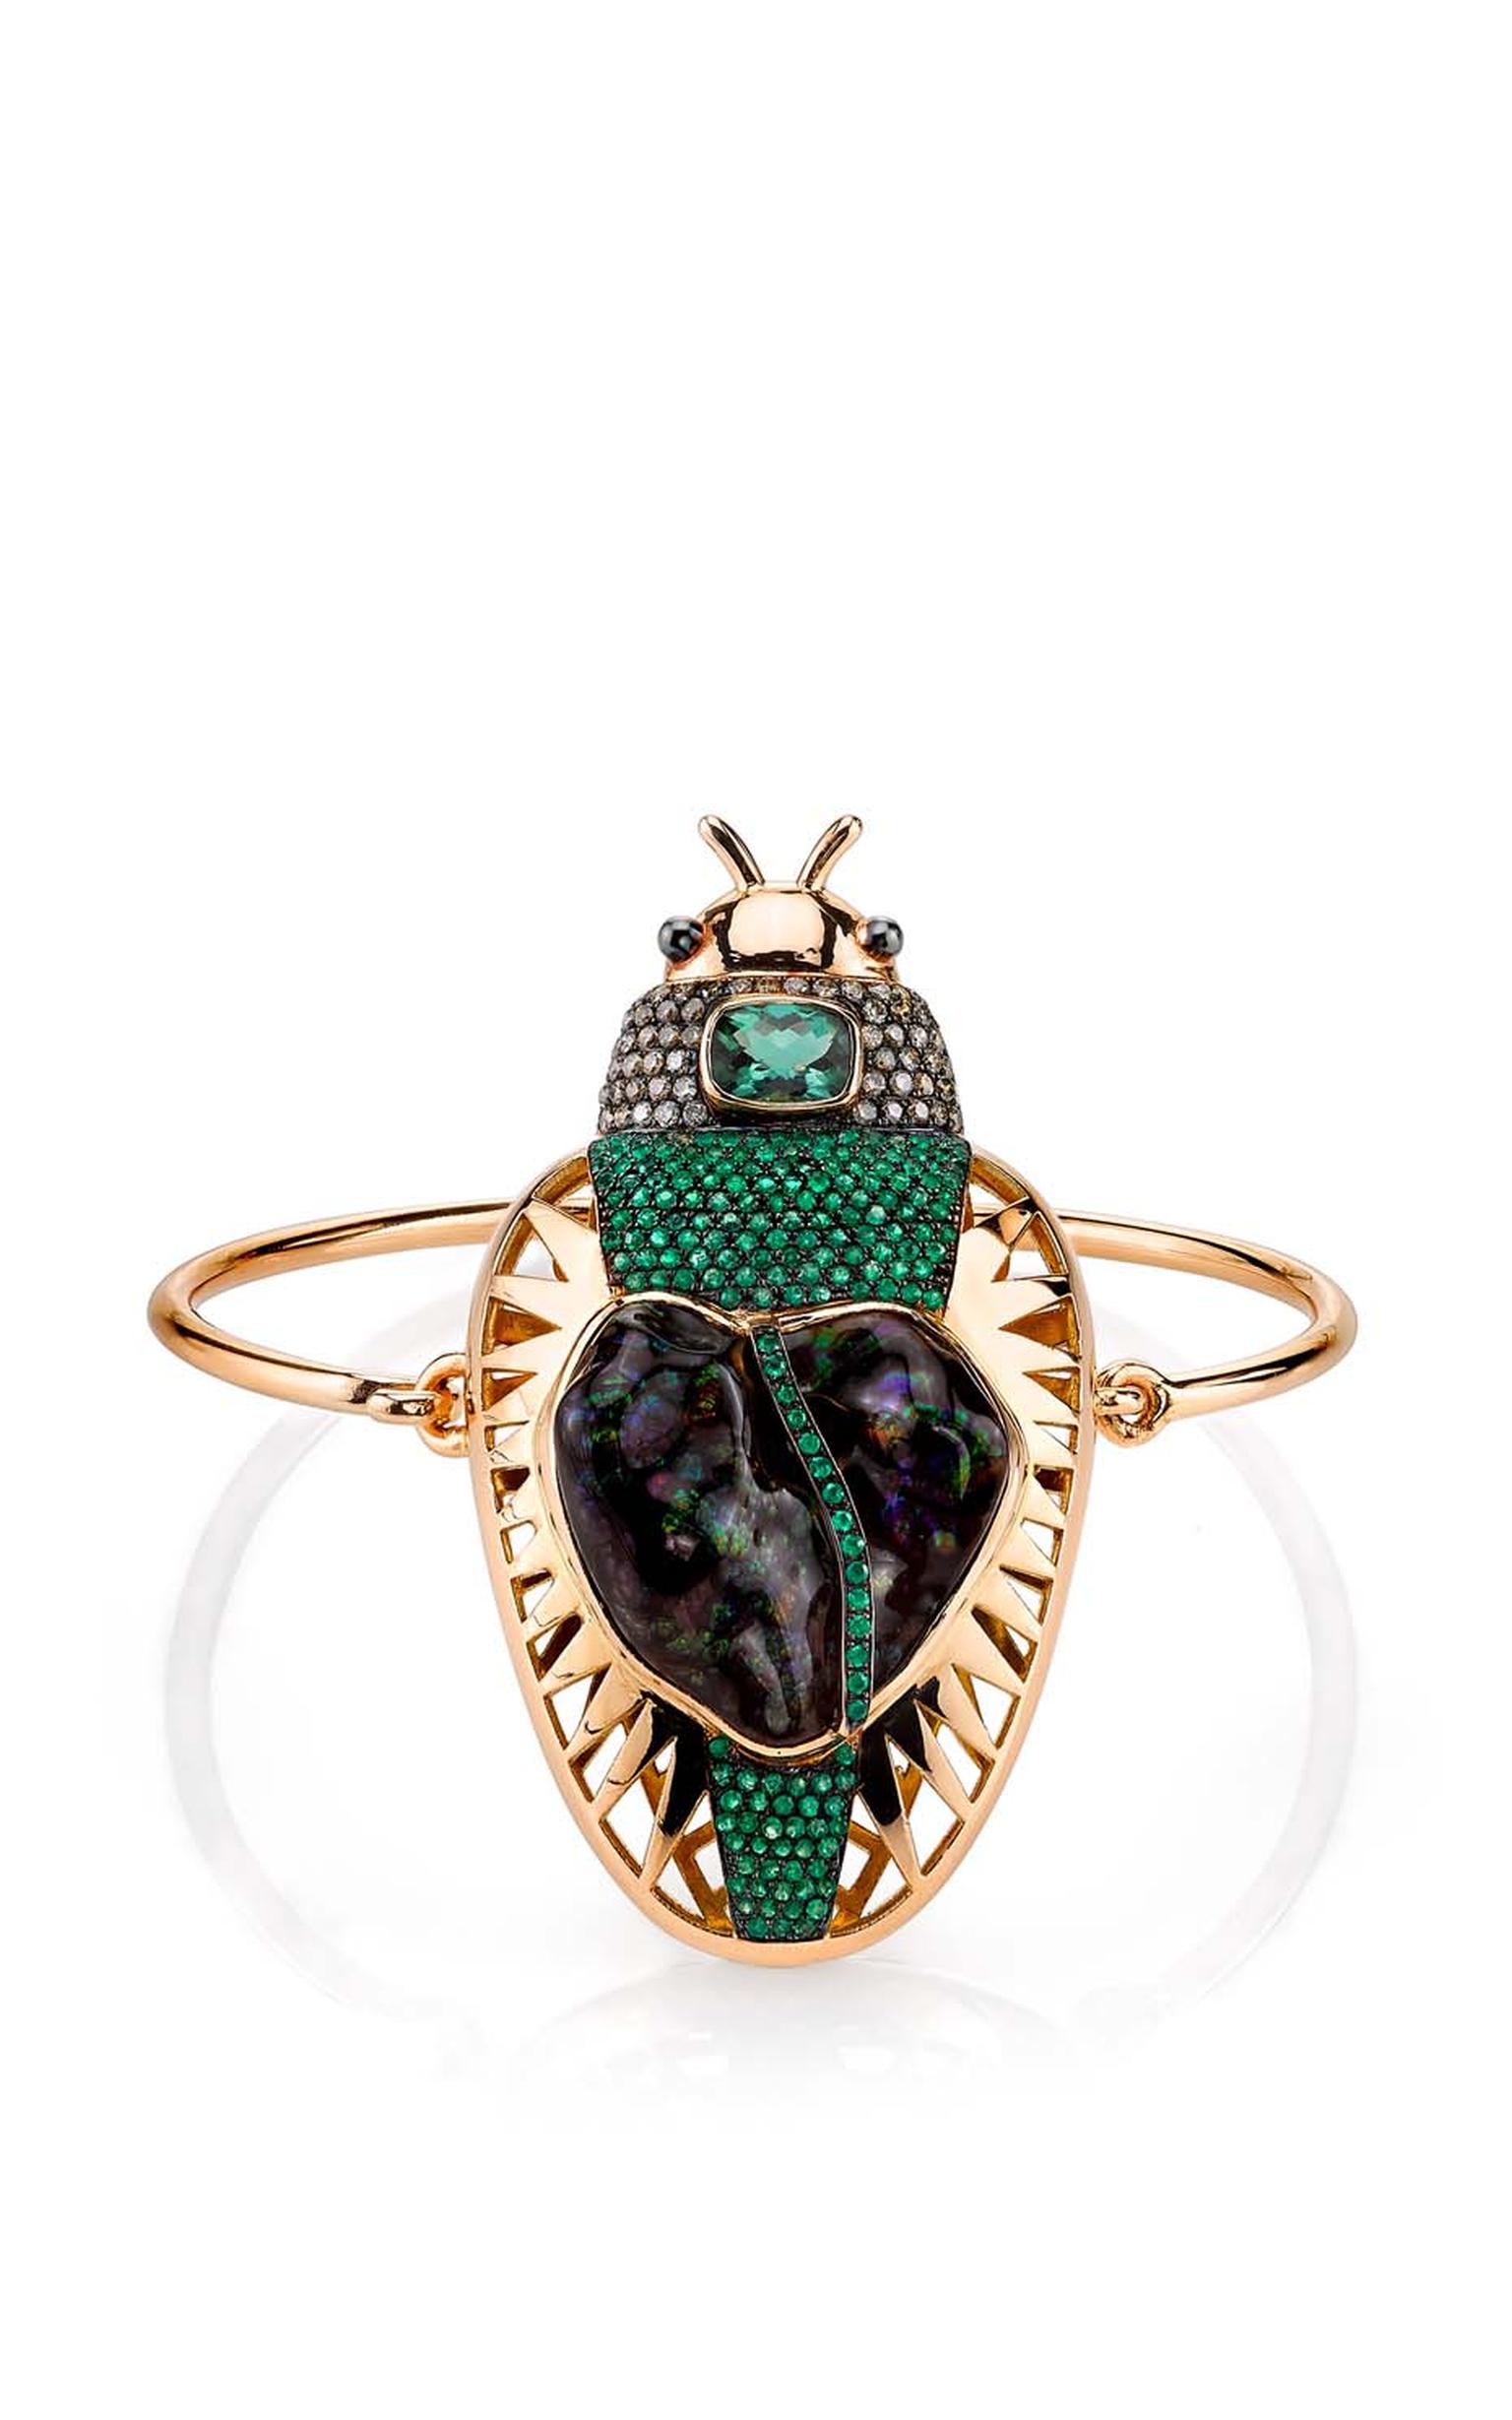 Daniela Villegas rose gold Zeus bracelet with champagne diamonds, a 21.48ct fire agate, emeralds and green tourmalines.